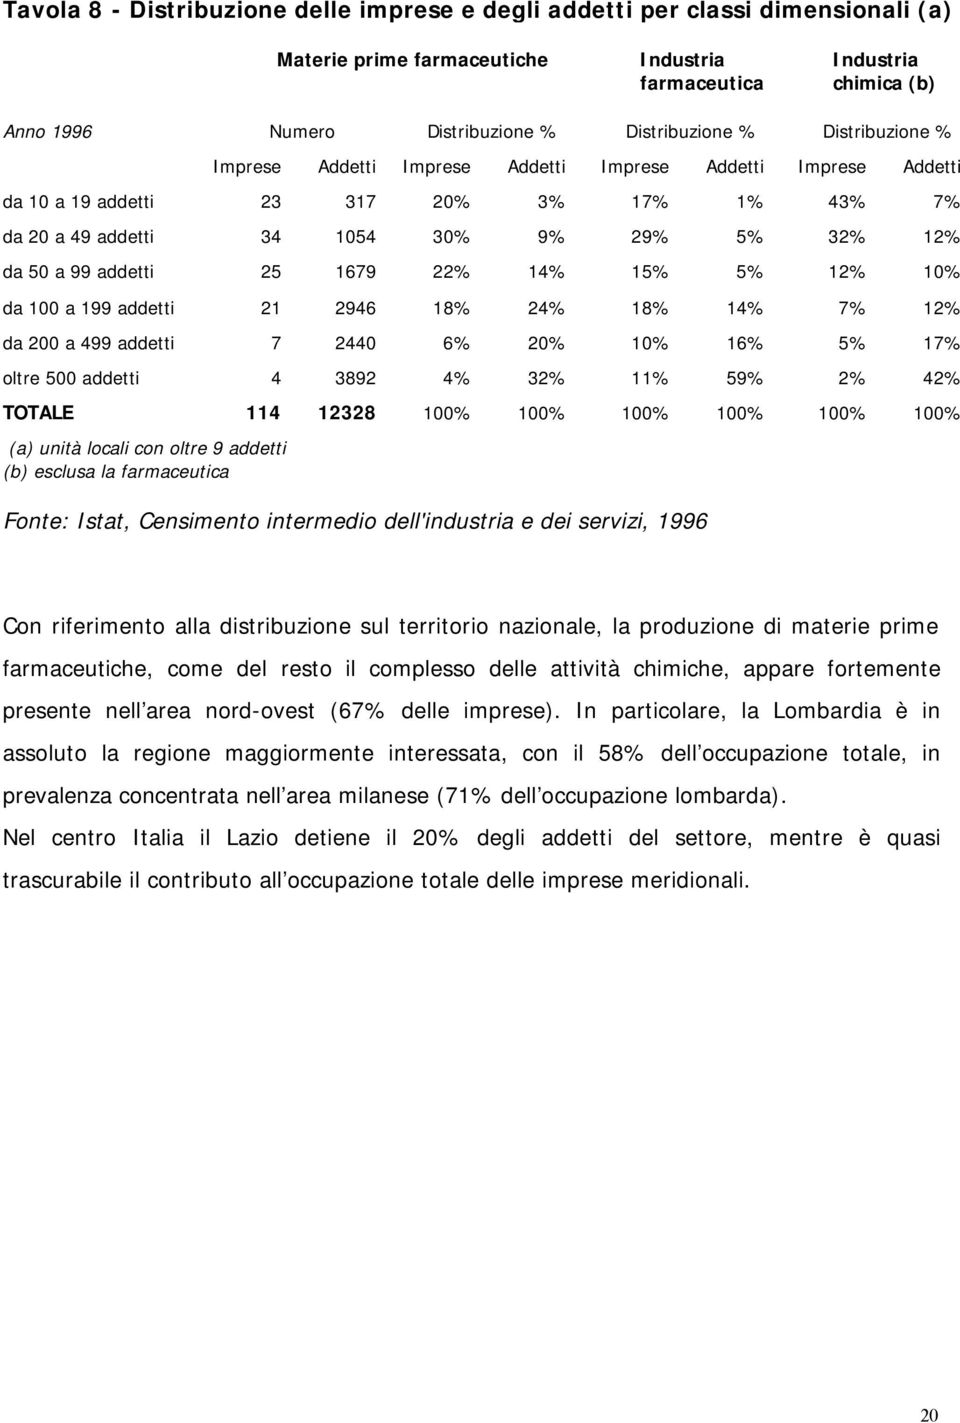 99 addetti 25 1679 22% 14% 15% 5% 12% 10% da 100 a 199 addetti 21 2946 18% 24% 18% 14% 7% 12% da 200 a 499 addetti 7 2440 6% 20% 10% 16% 5% 17% oltre 500 addetti 4 3892 4% 32% 11% 59% 2% 42% TOTALE